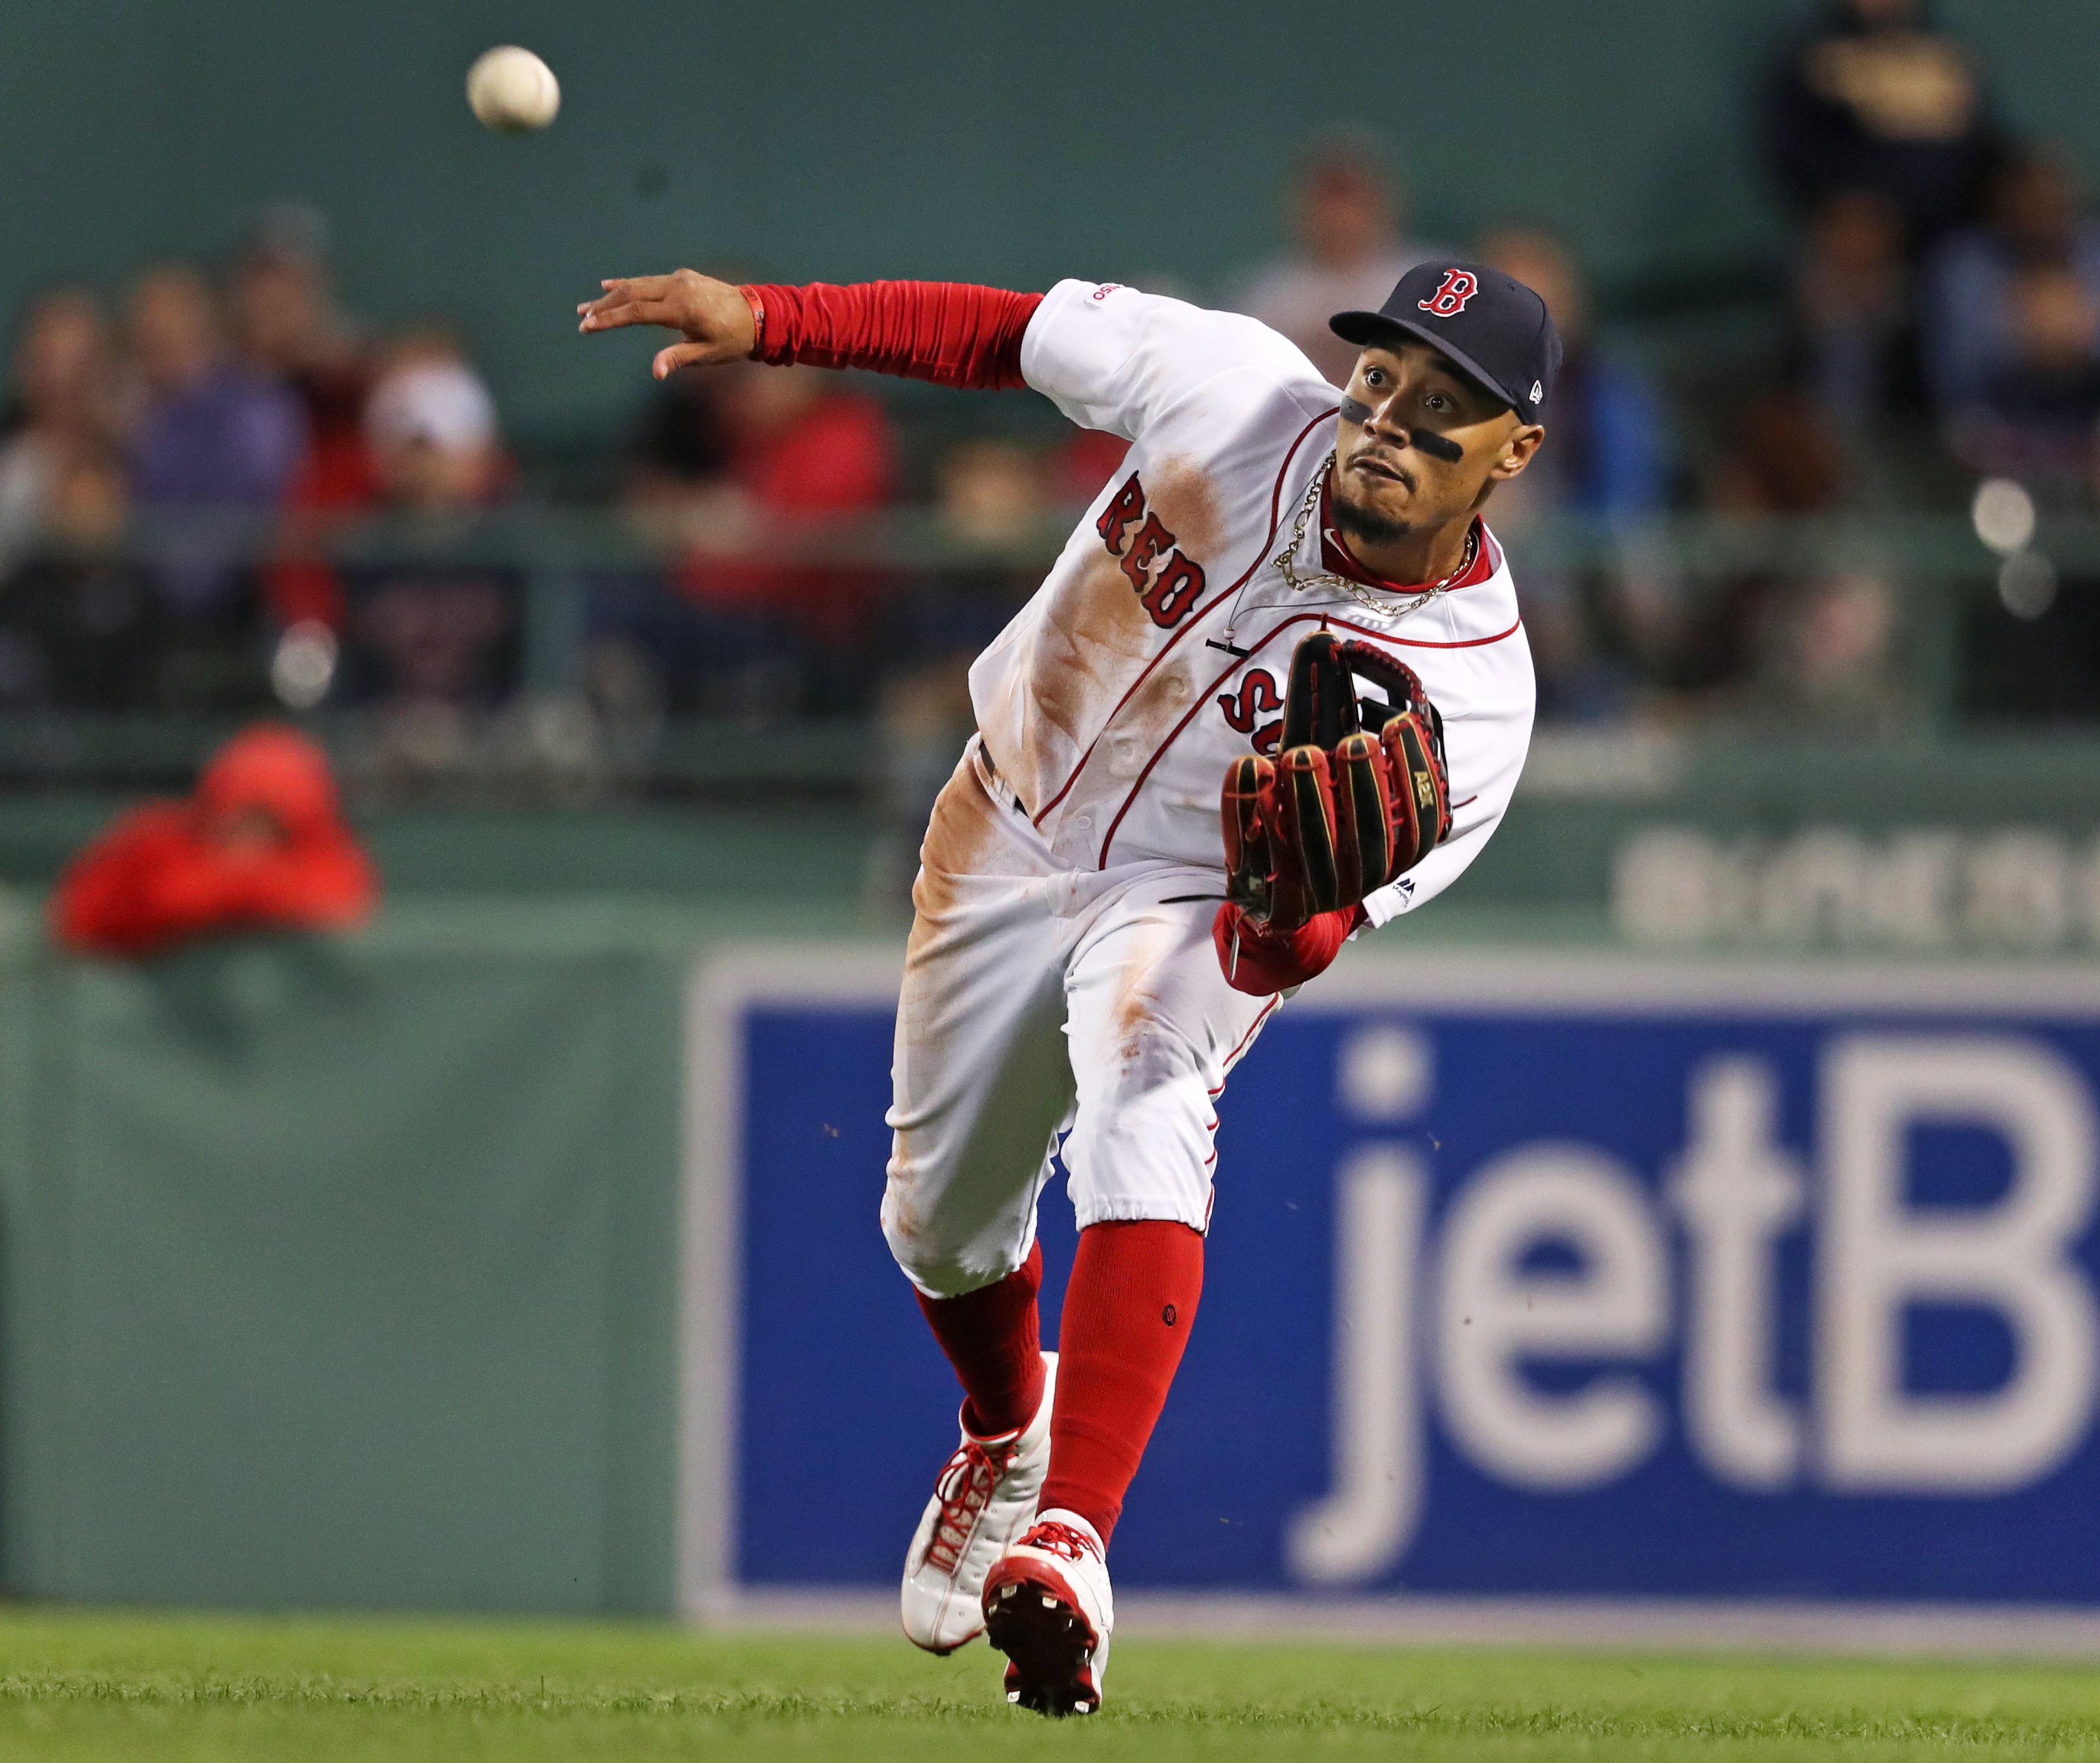 The Red Sox have a great outfield. But for how long? - The Boston